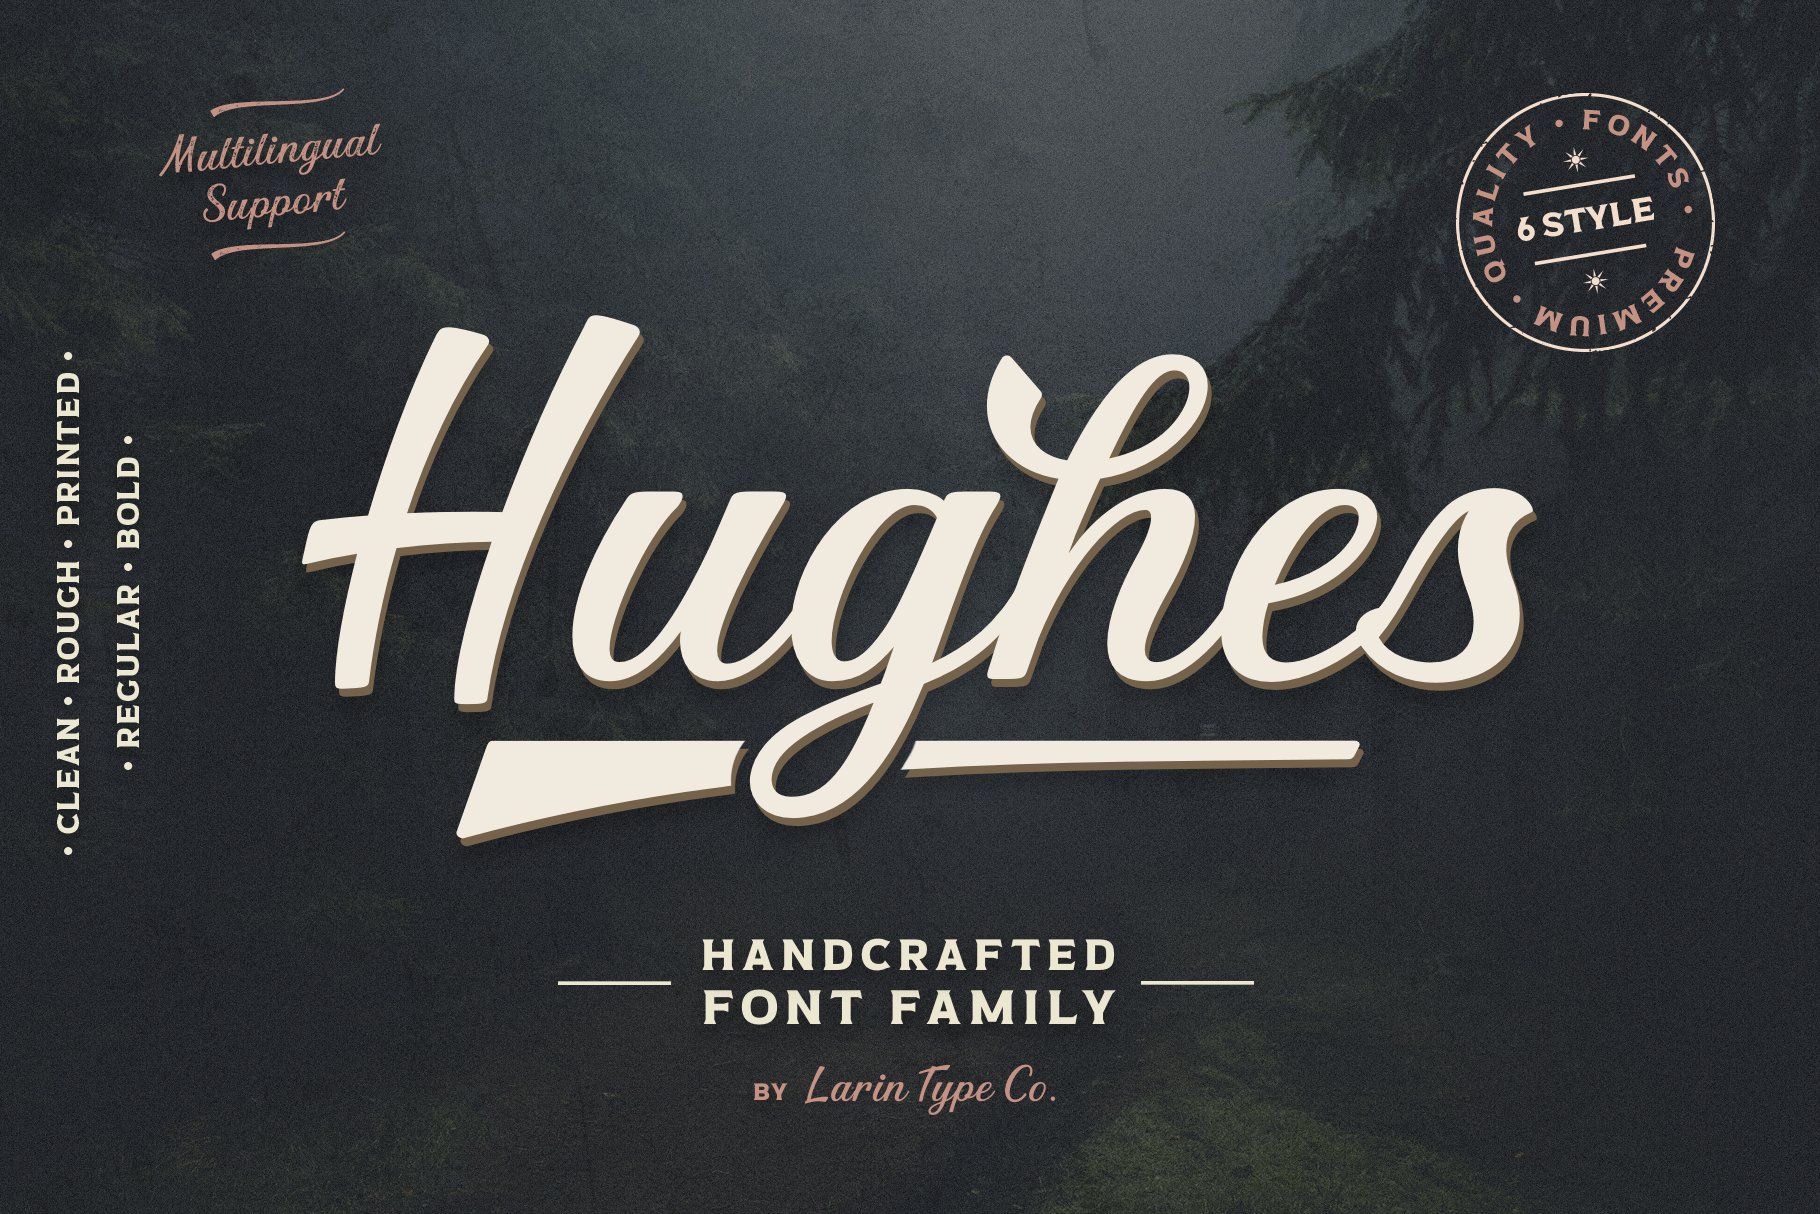 Hughes cover image.